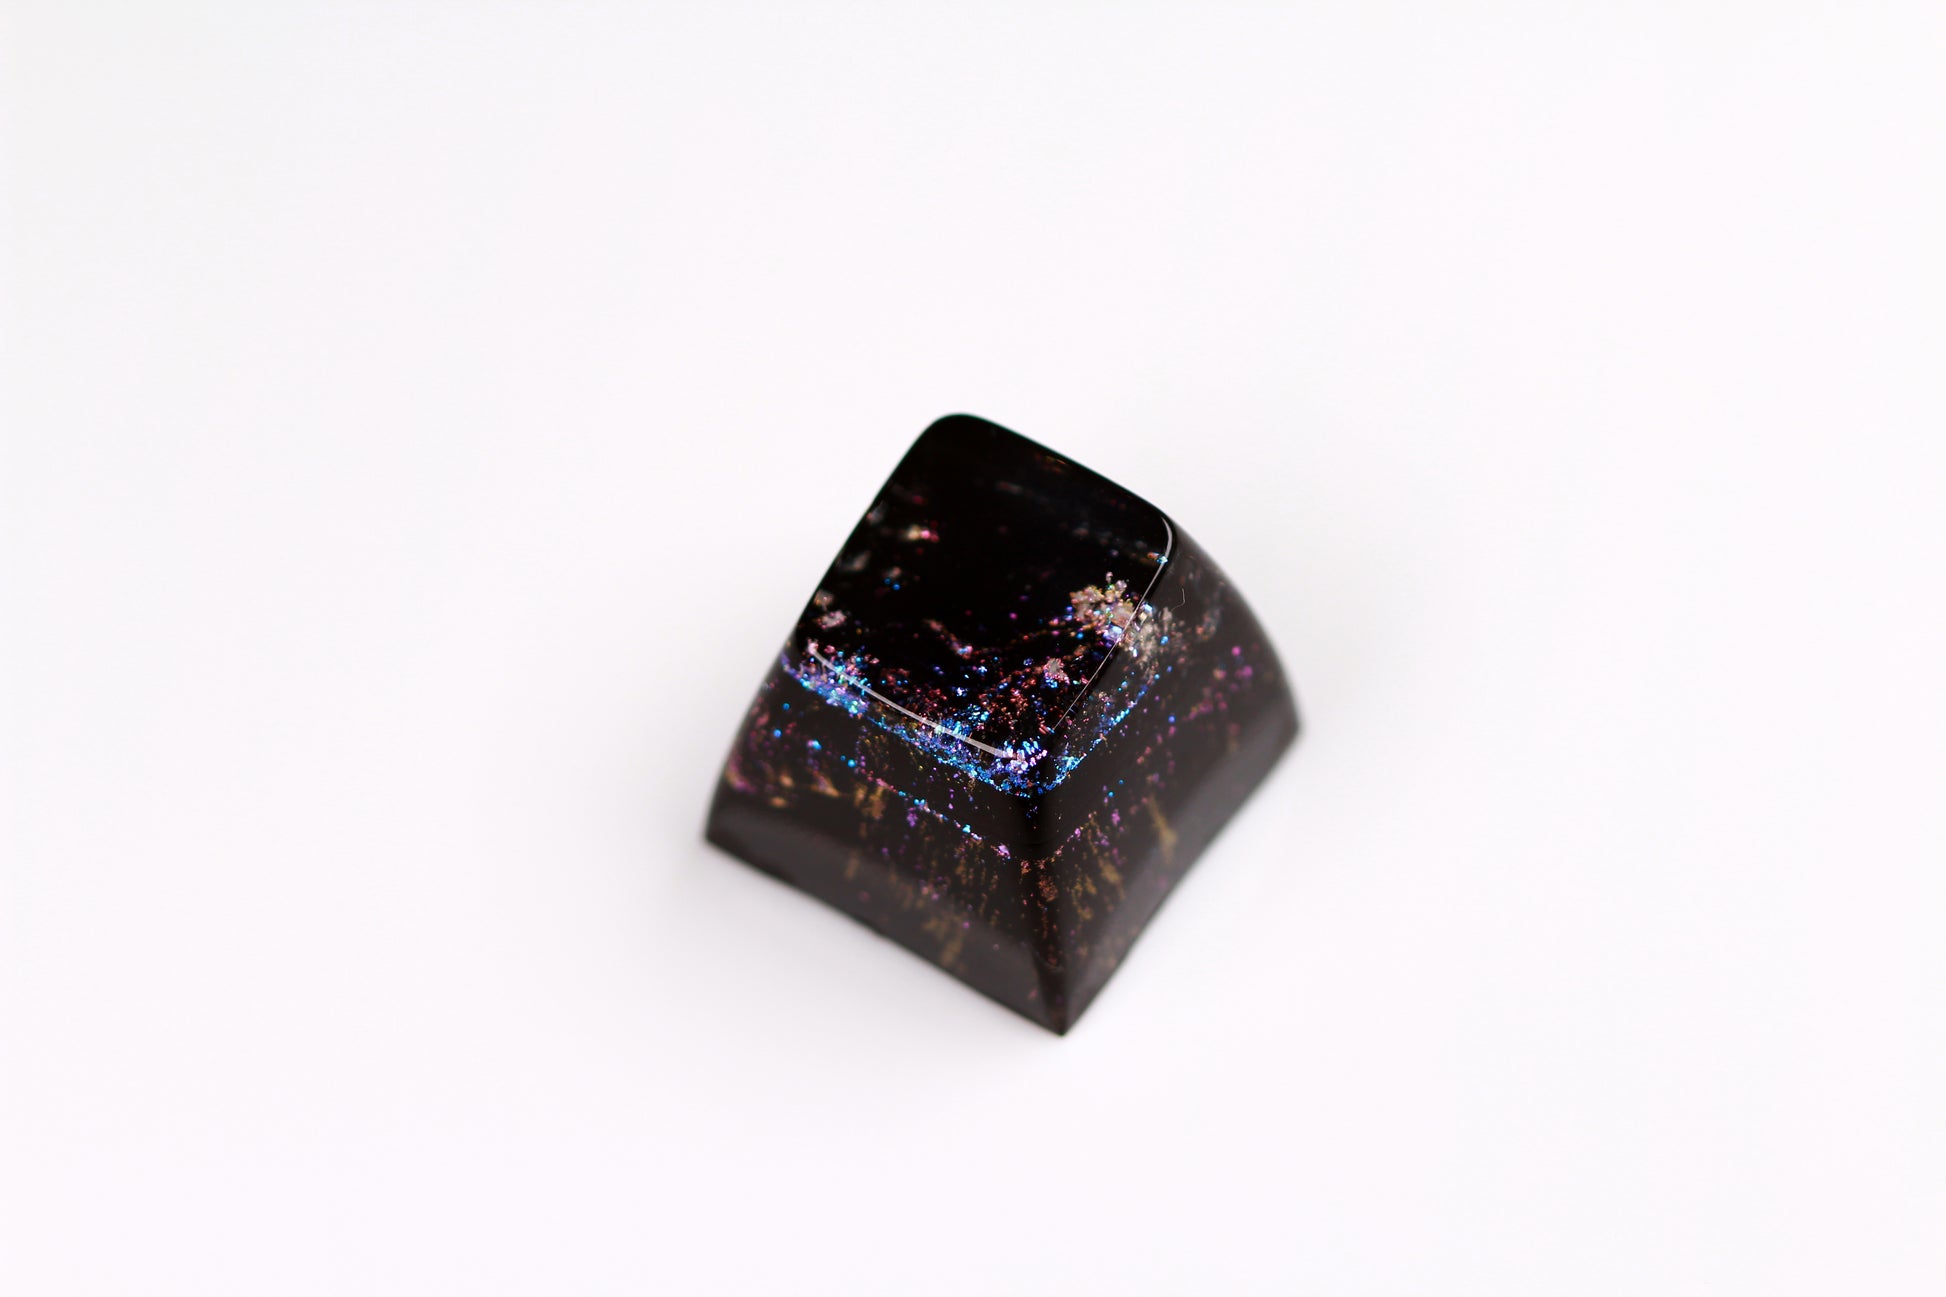 Gimpy SA Row 1 - Deep Field Particle Stream 1 - PrimeCaps Keycap - Blank and Sculpted Artisan Keycaps for cherry MX mechanical keyboards 